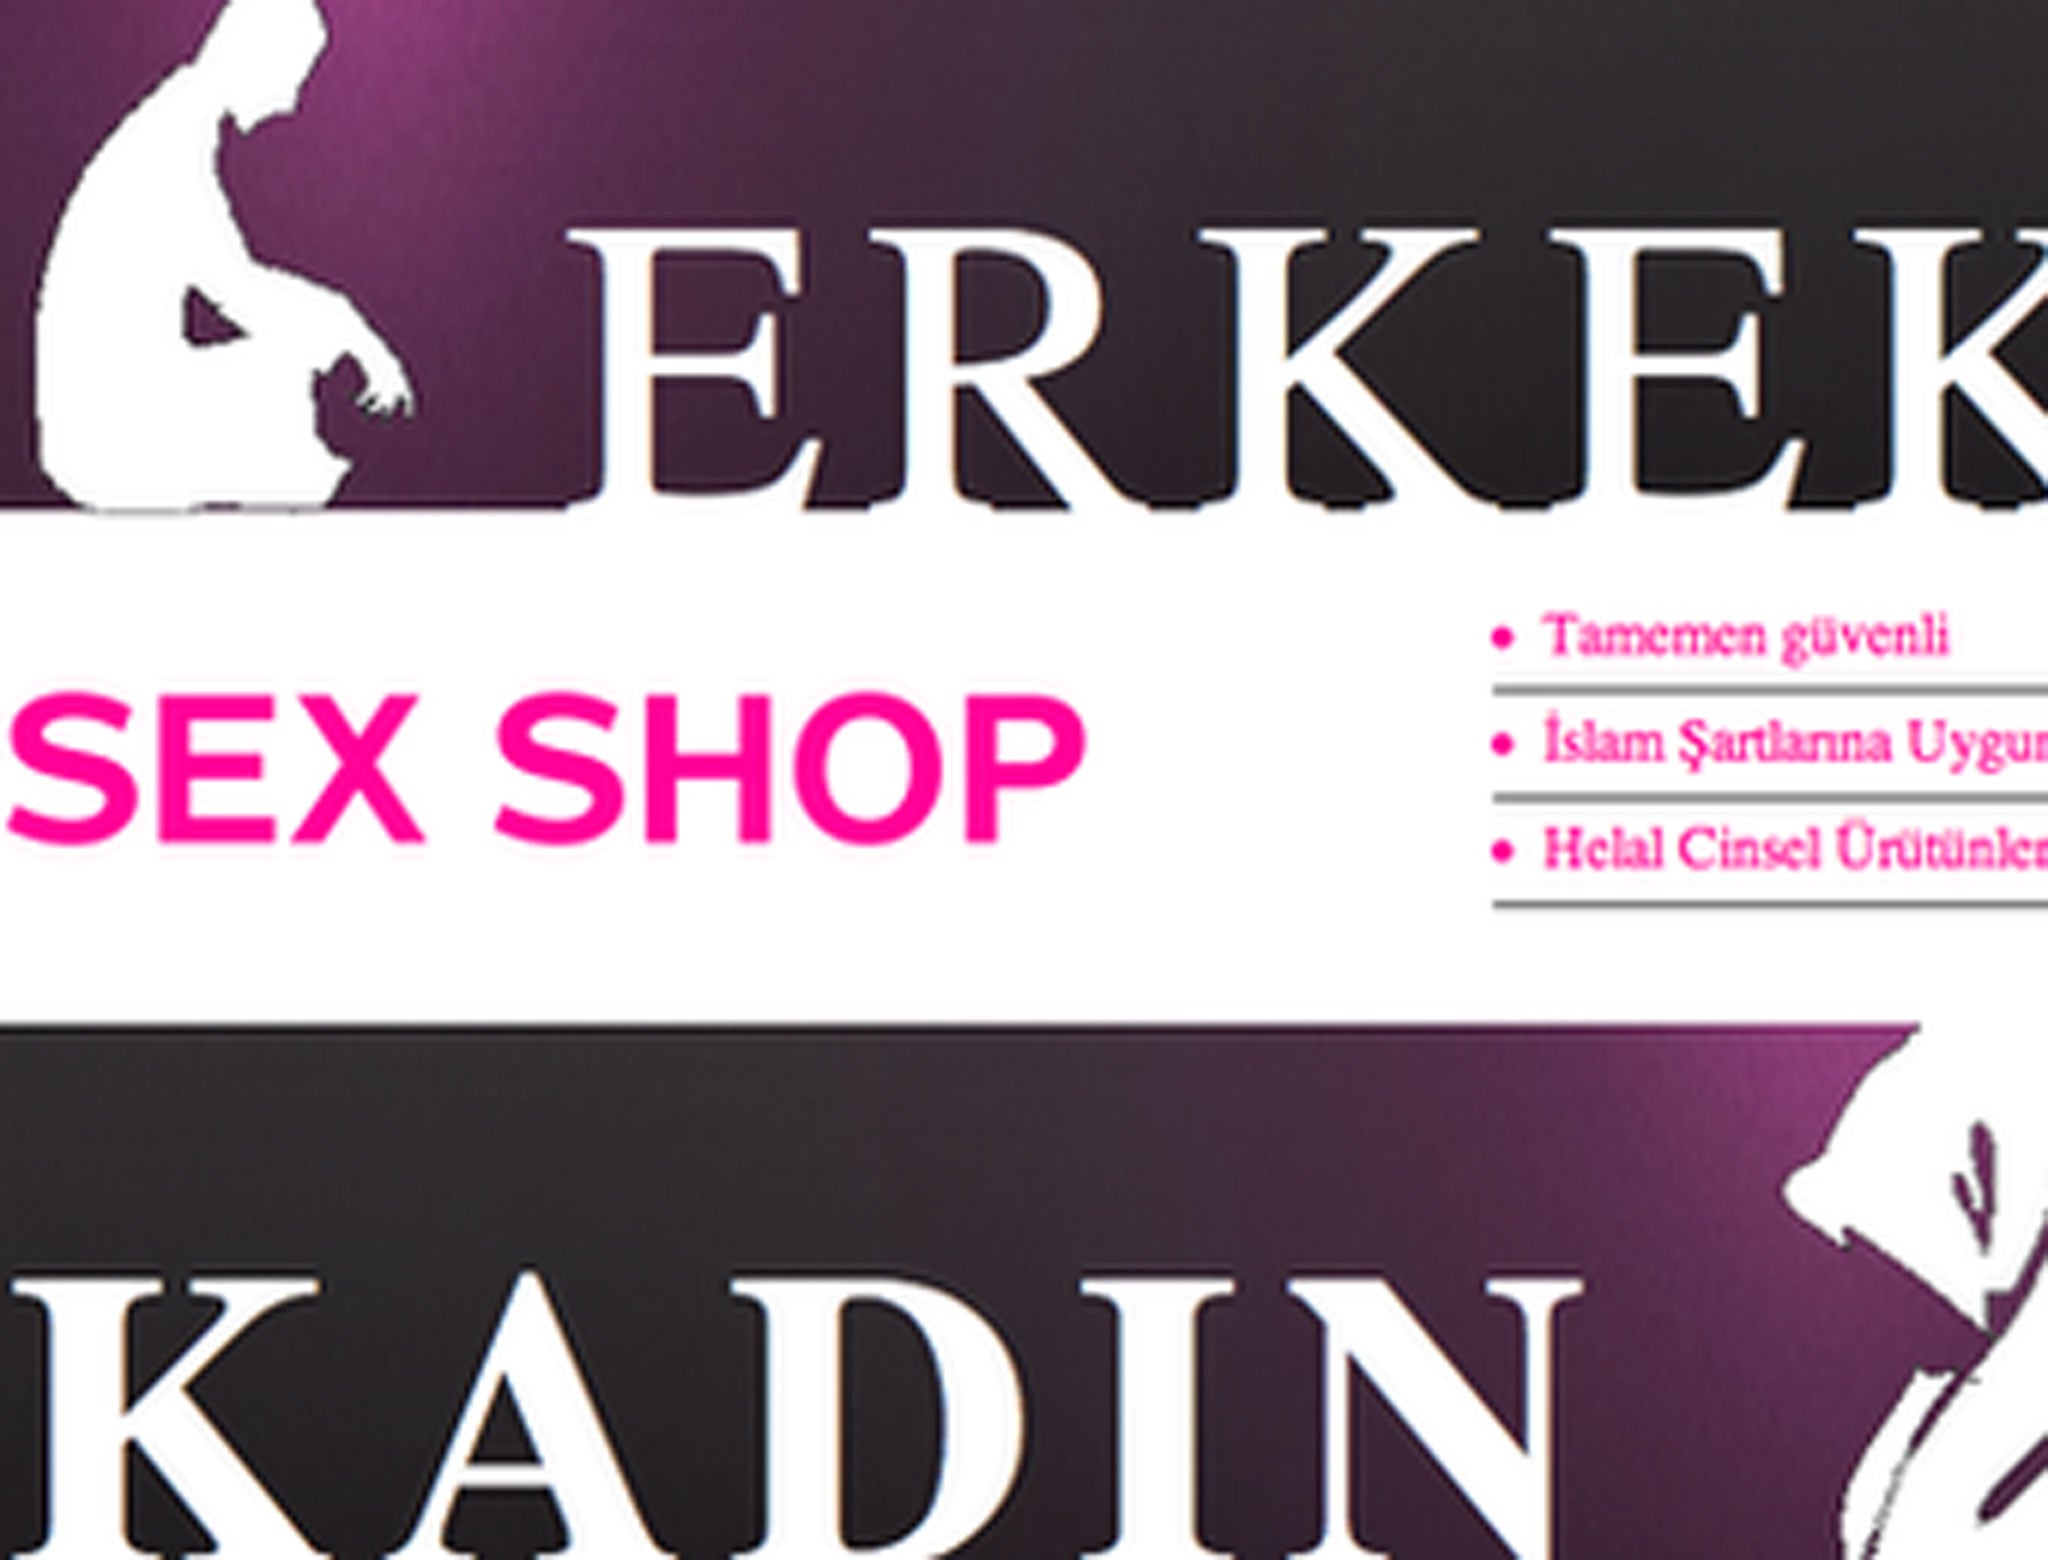 The front page of the Helal Sex Shop website